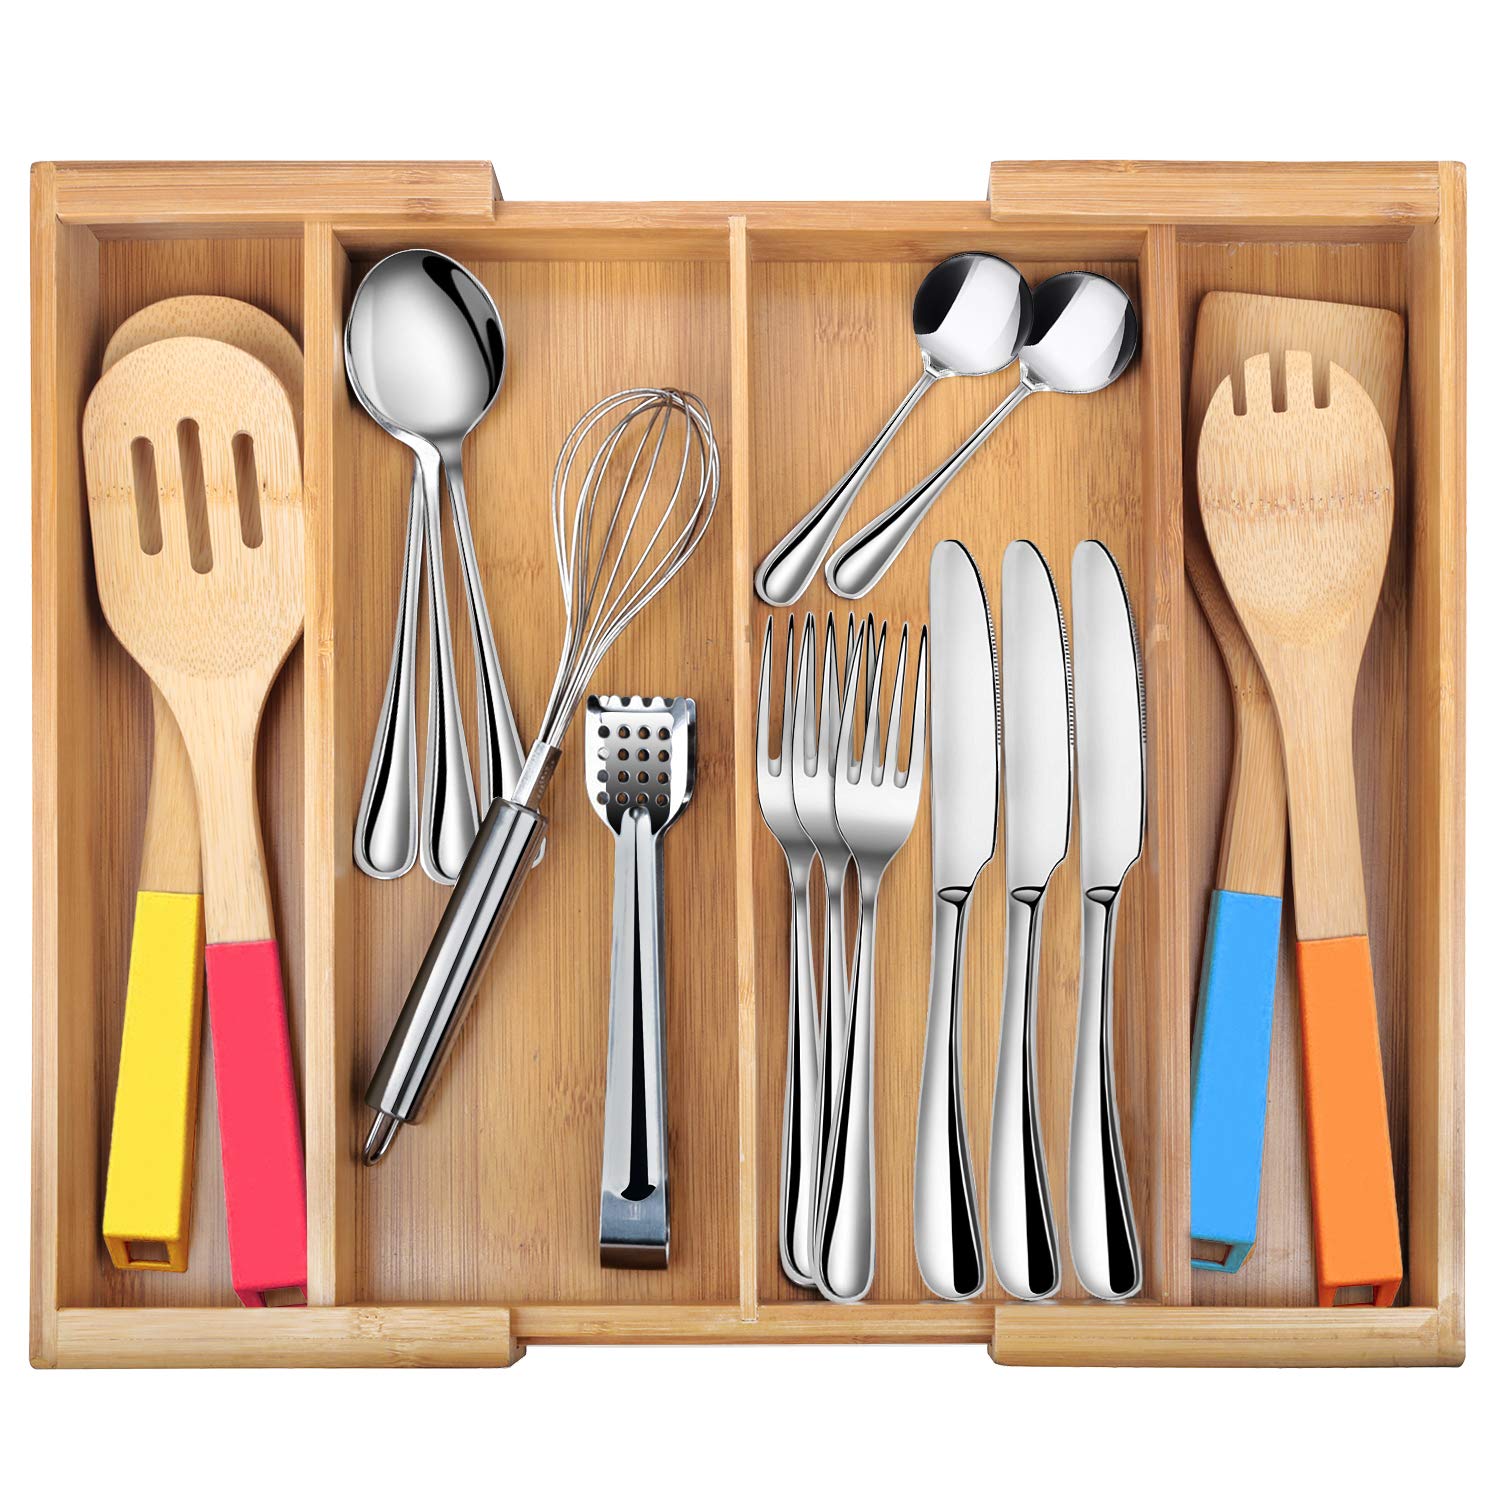 Drawer Dividers silverware tray Expandable Utensil Cutlery Tray Bamboo Wooden Adjustable 4 Compartments Flatware Organizer Kitchen Storage Holder for Knives Forks Spoons Accessories Gadgets